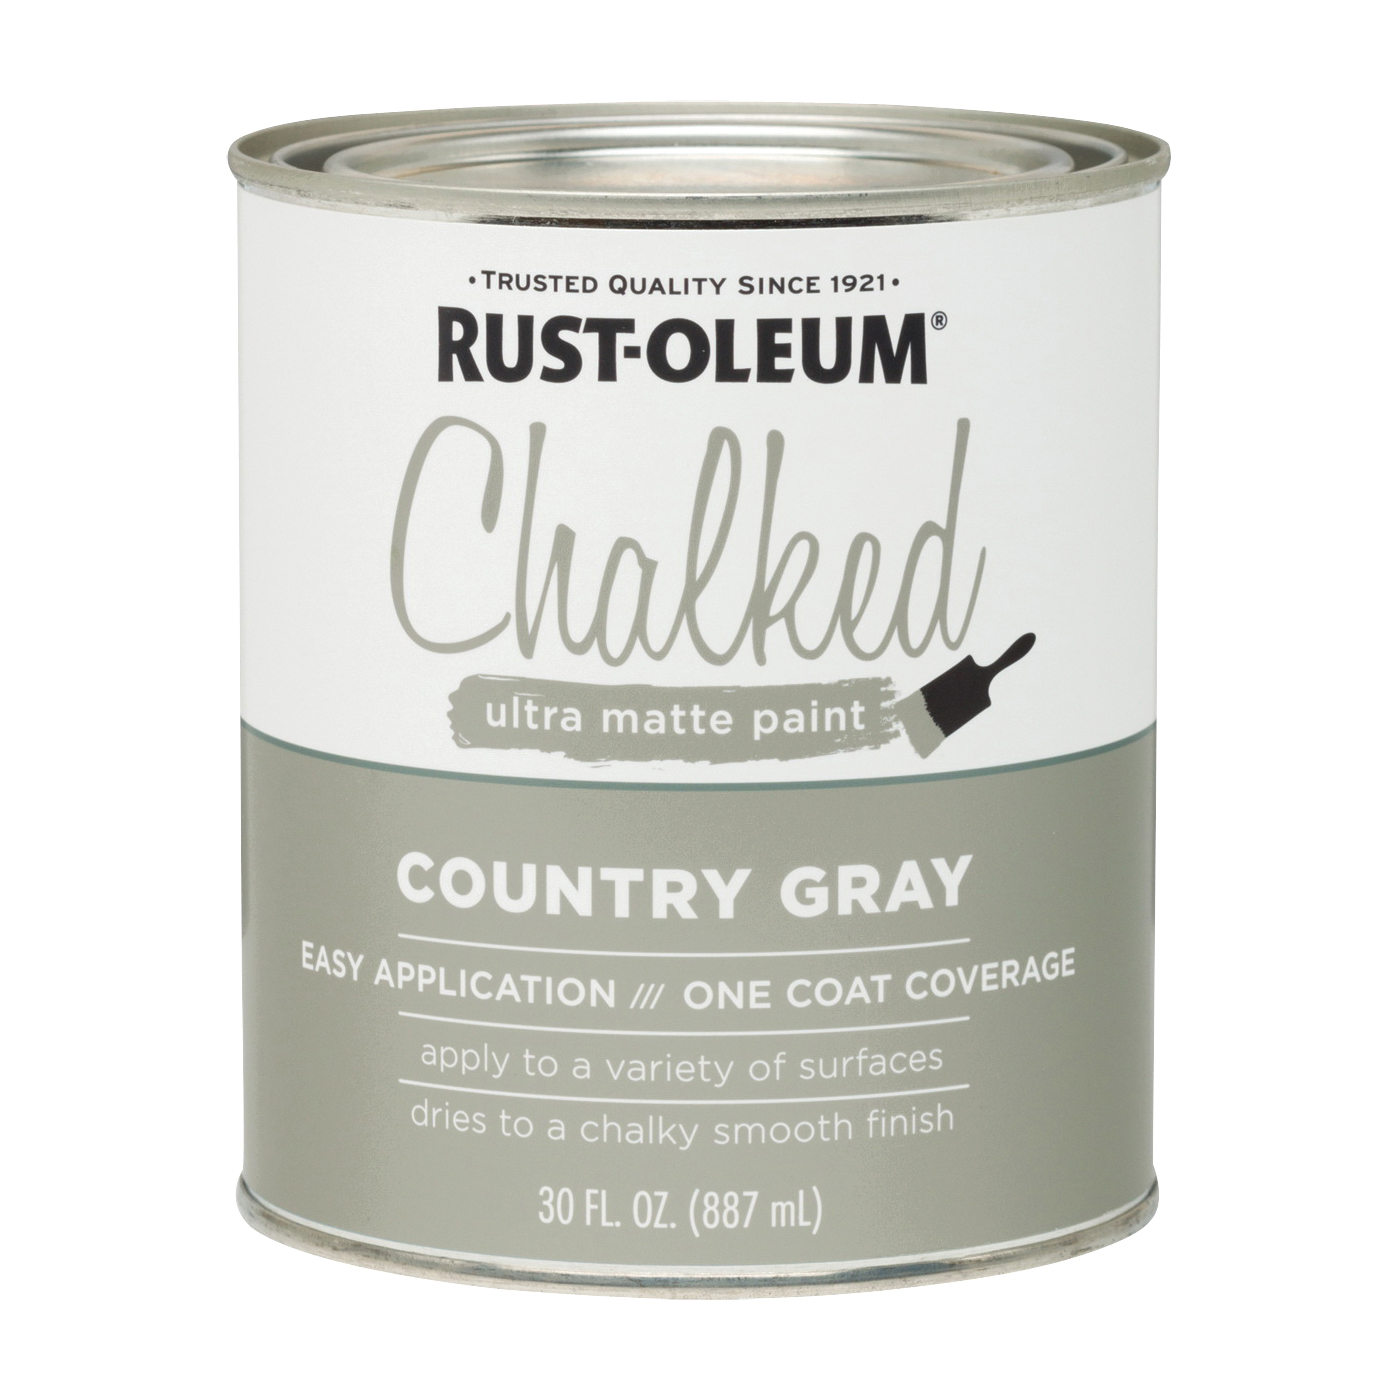 Chalked 285141 Chalked Paint, Ultra Matte, Country Gray, 30 oz, Quart